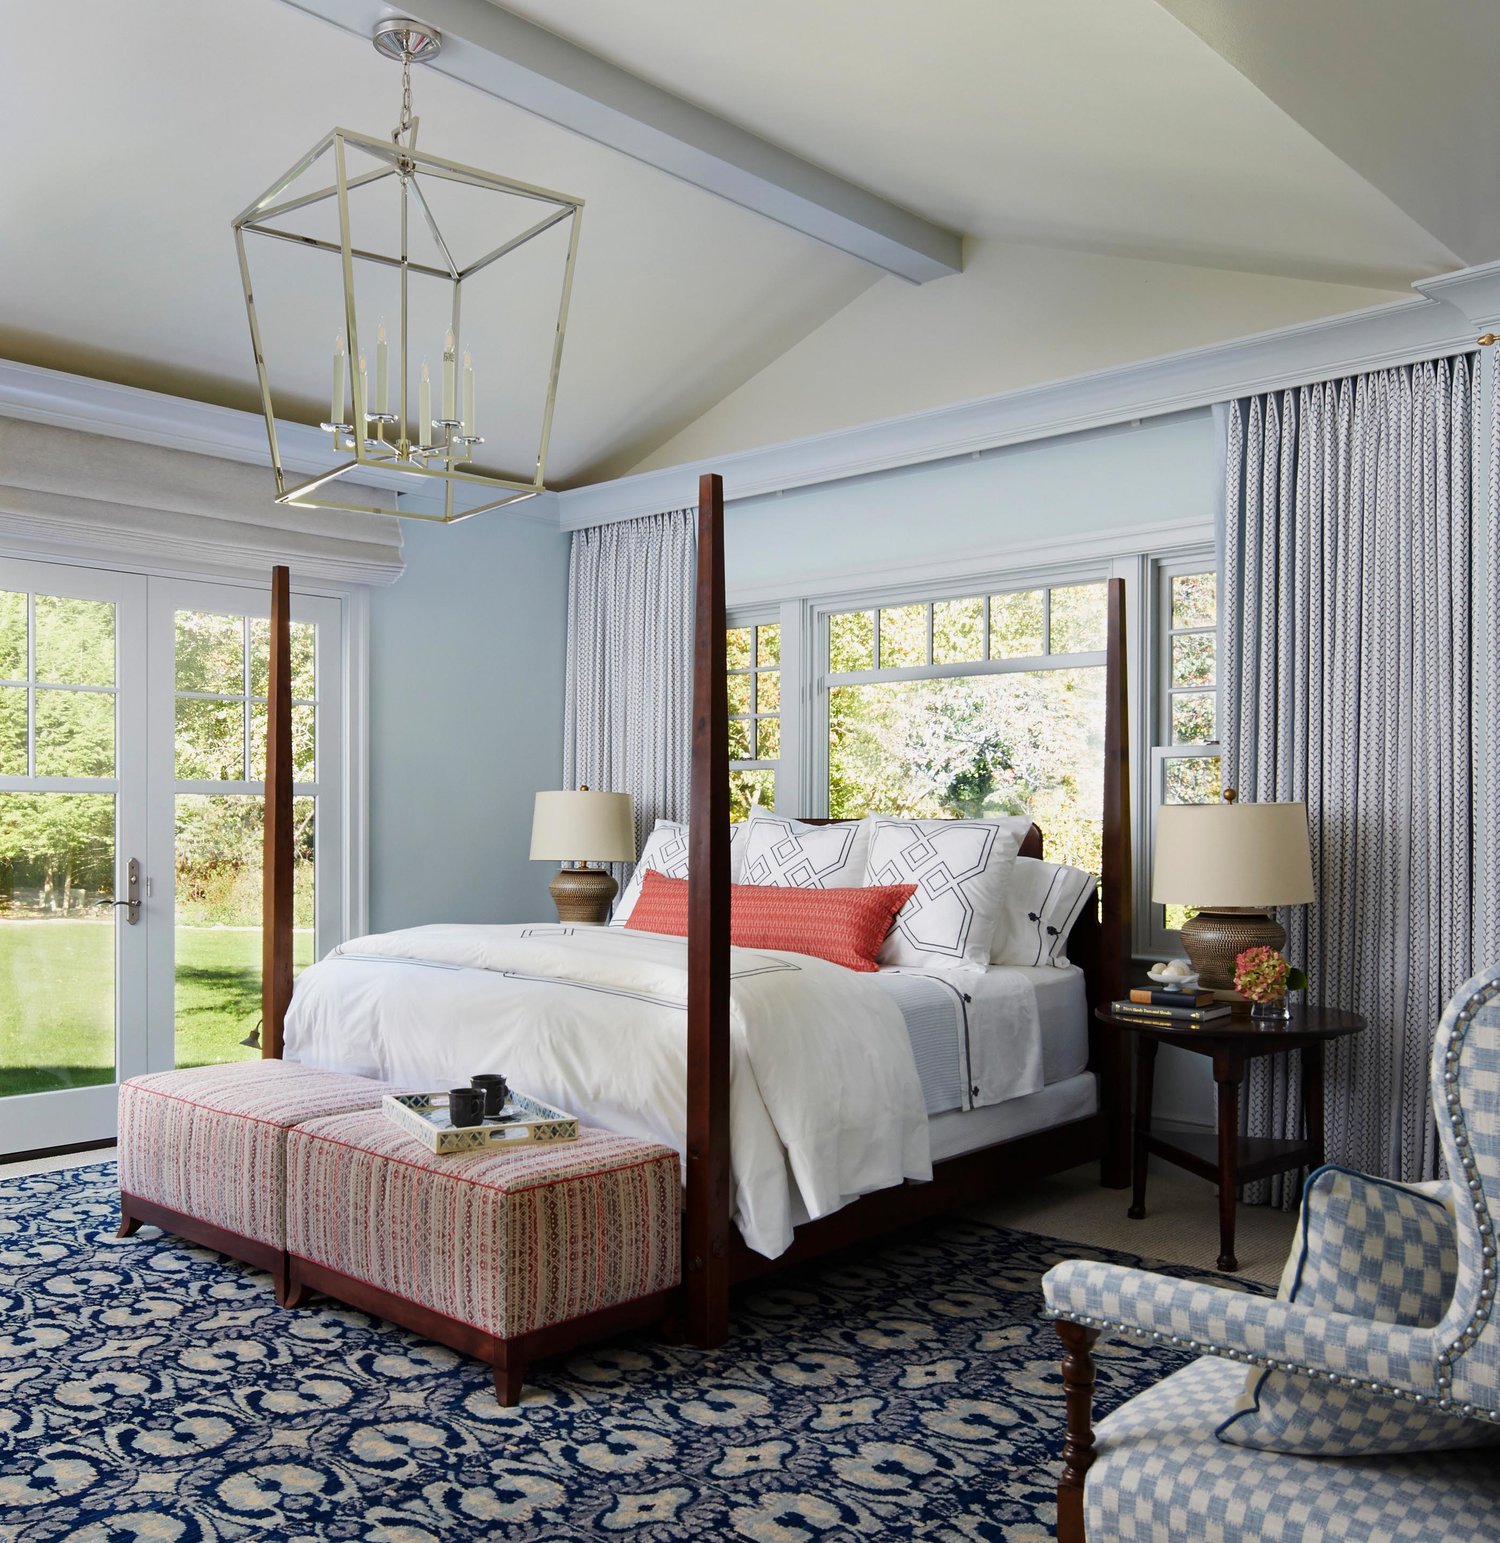 Traditional style bedroom with blue and pops of coral. Come see more interior design inspiration from Elizabeth Drake. Photo by Werner Straube. #interiordesign #classicdesign #traditionaldecor #housetour #elizabethdrake